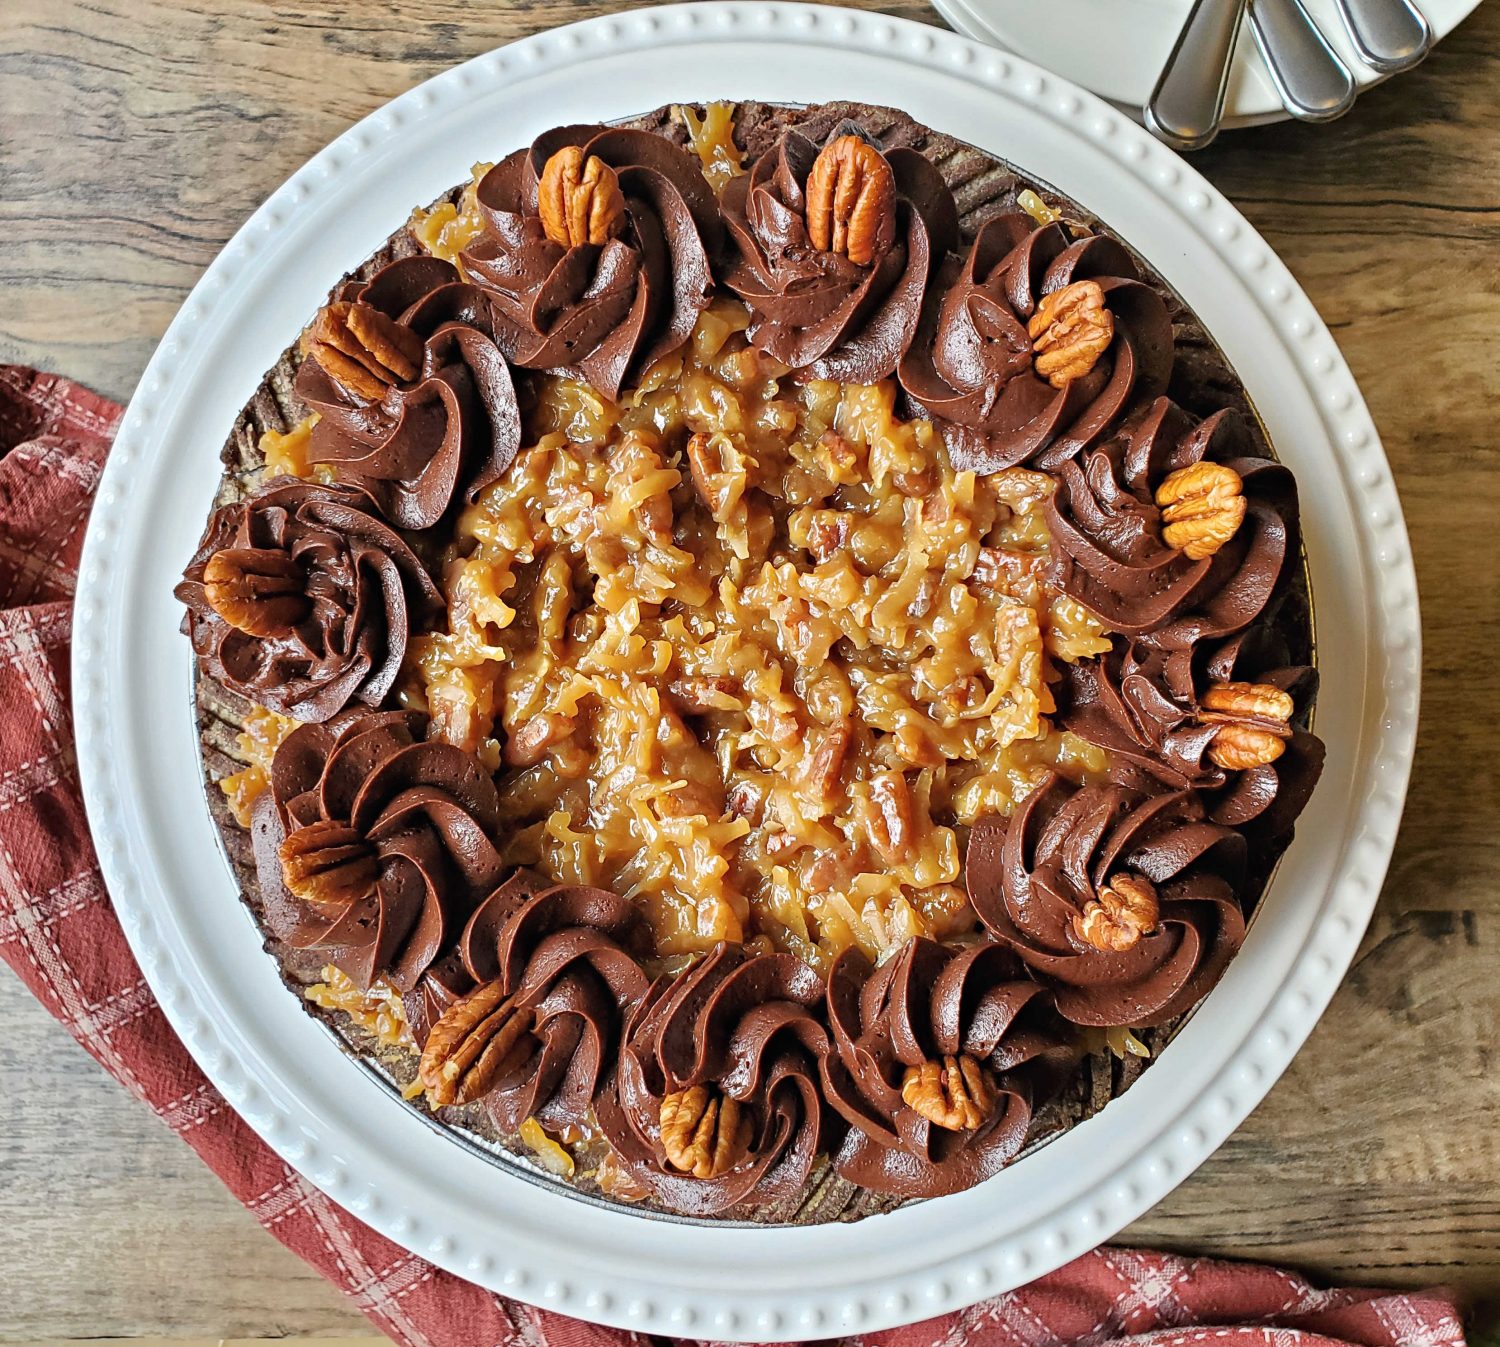 Decadent chocolate filling with toasted coconut and pecans, topped with sweet nutty topping & baked in an ultra-flaky chocolate crust.